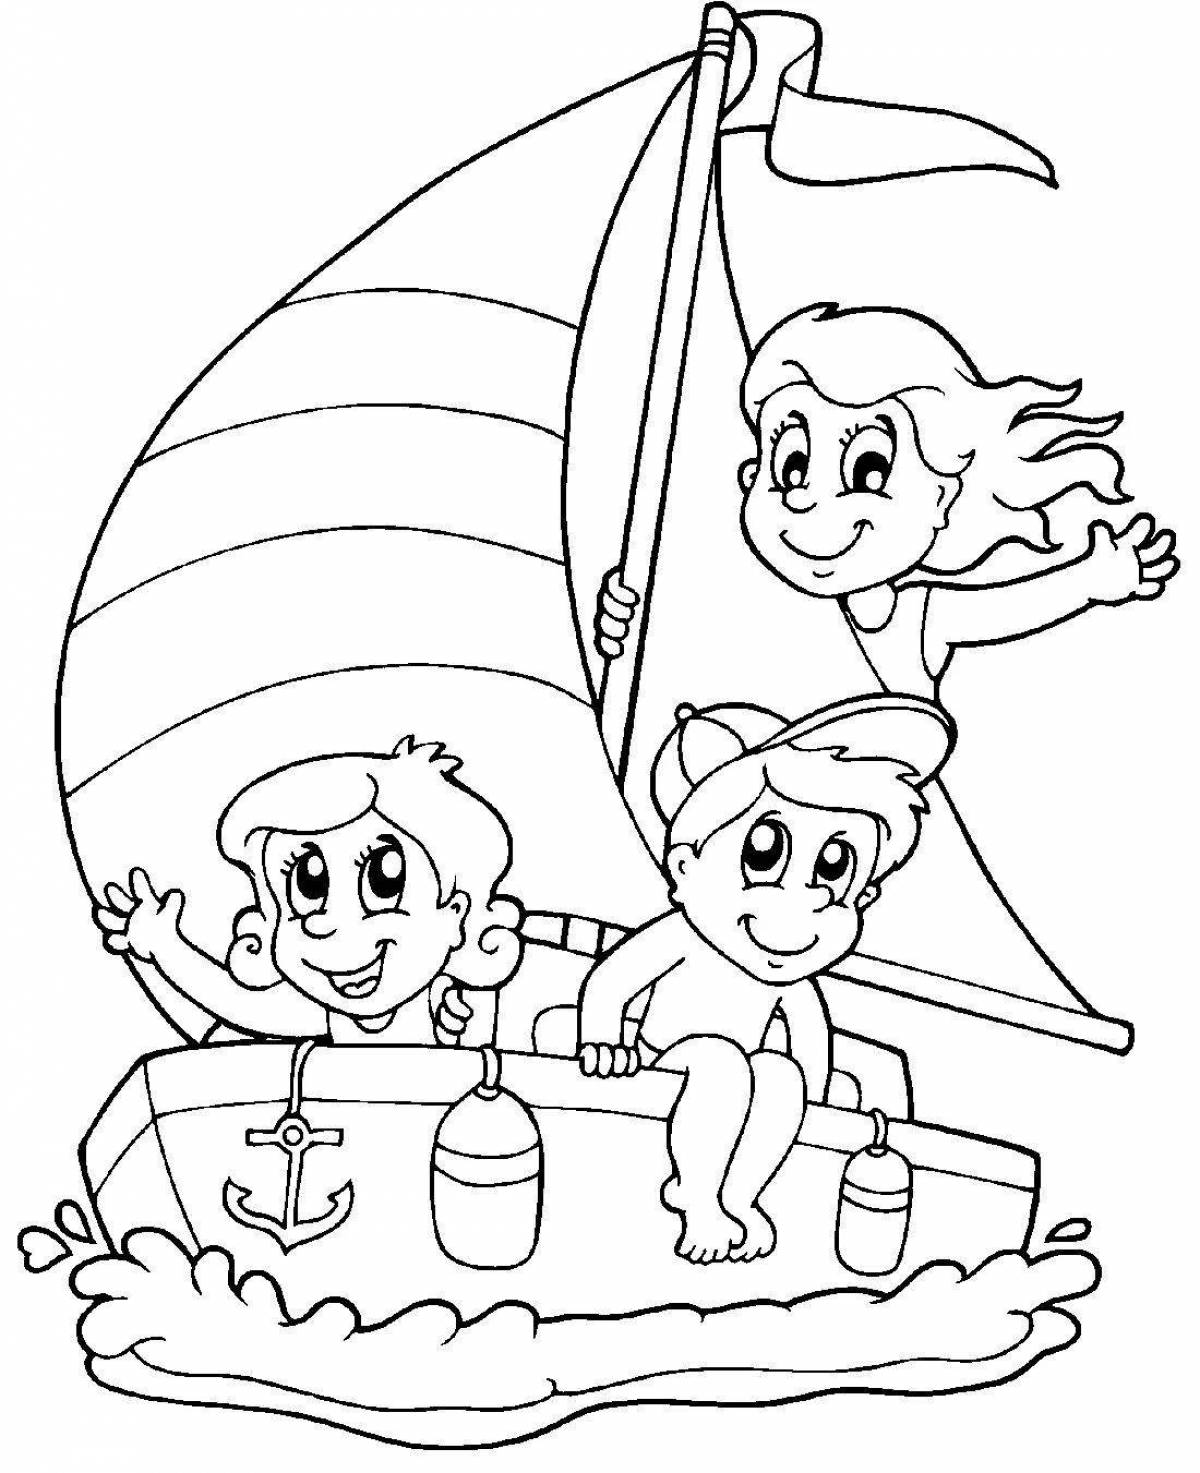 Adventure coloring page for kids